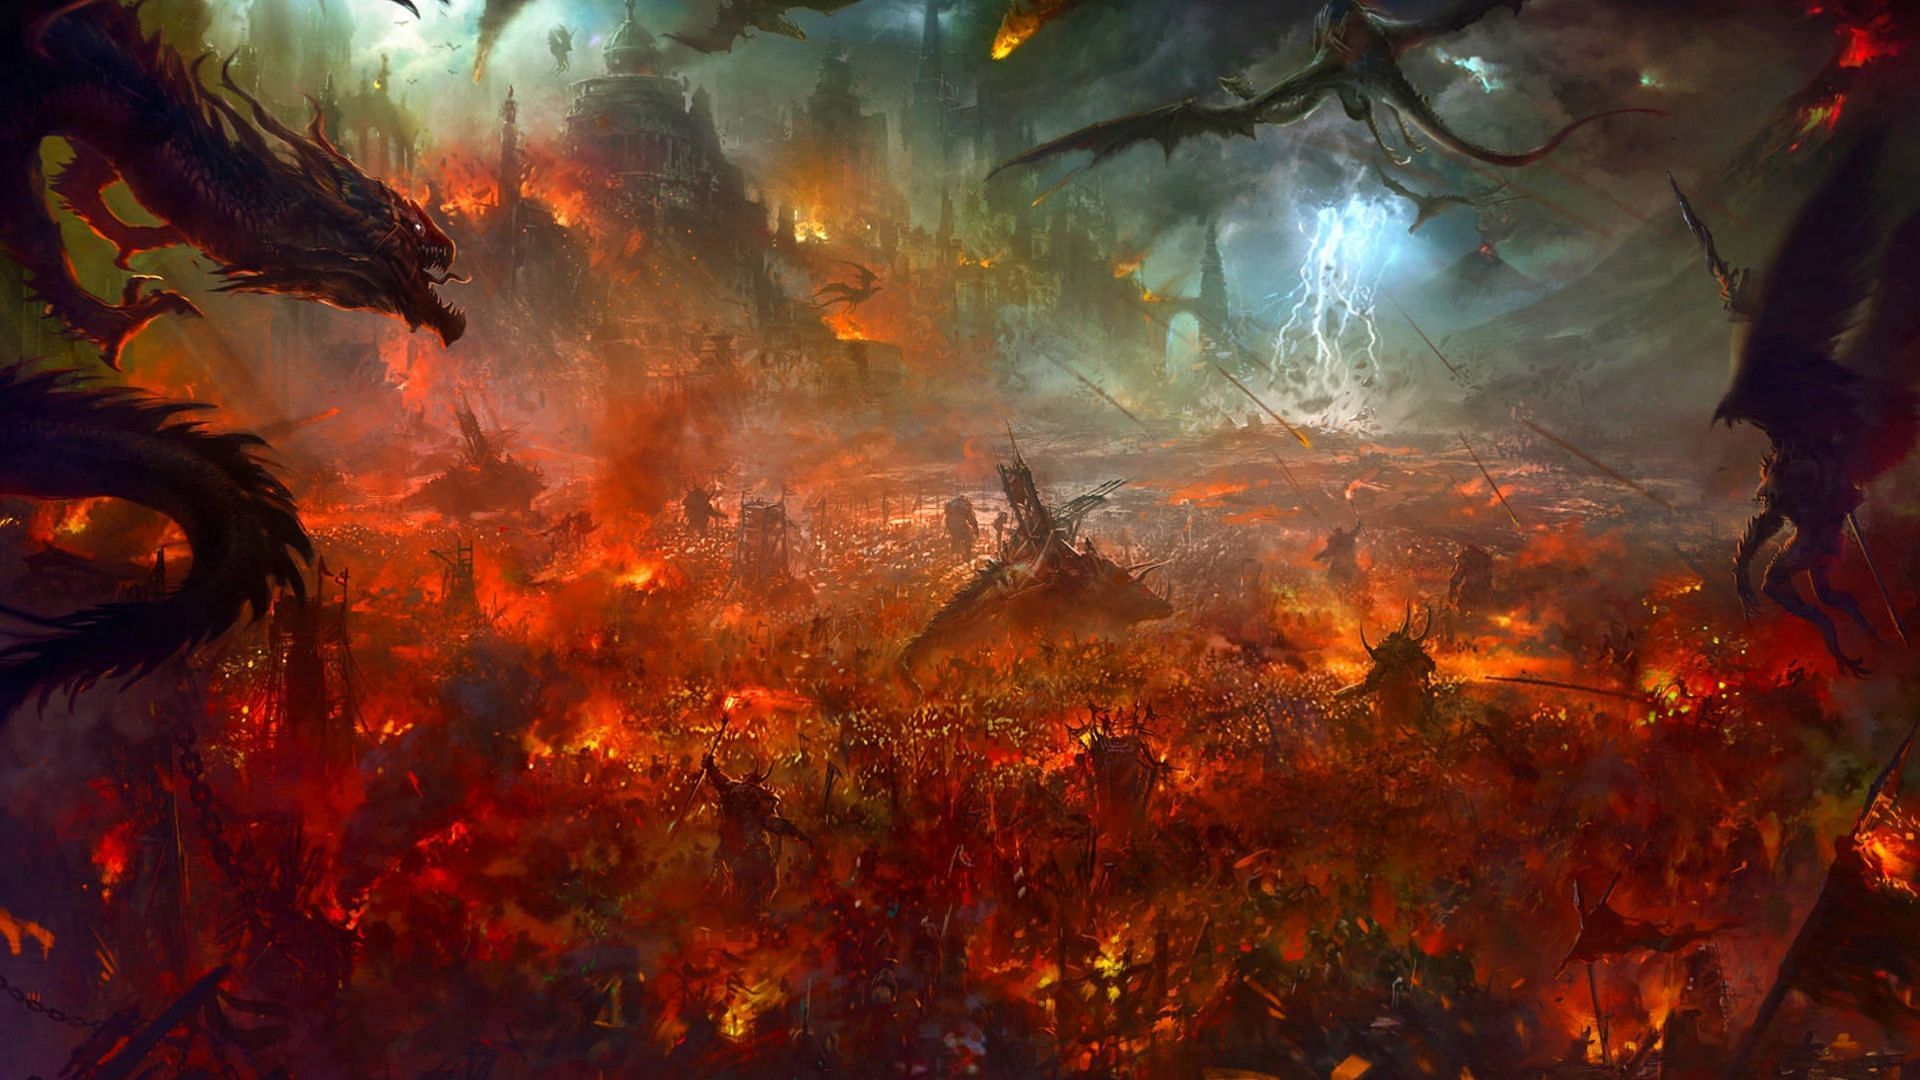 The War of Wrath that saw the defeat of Morgoth (Image via DishonoredGod)